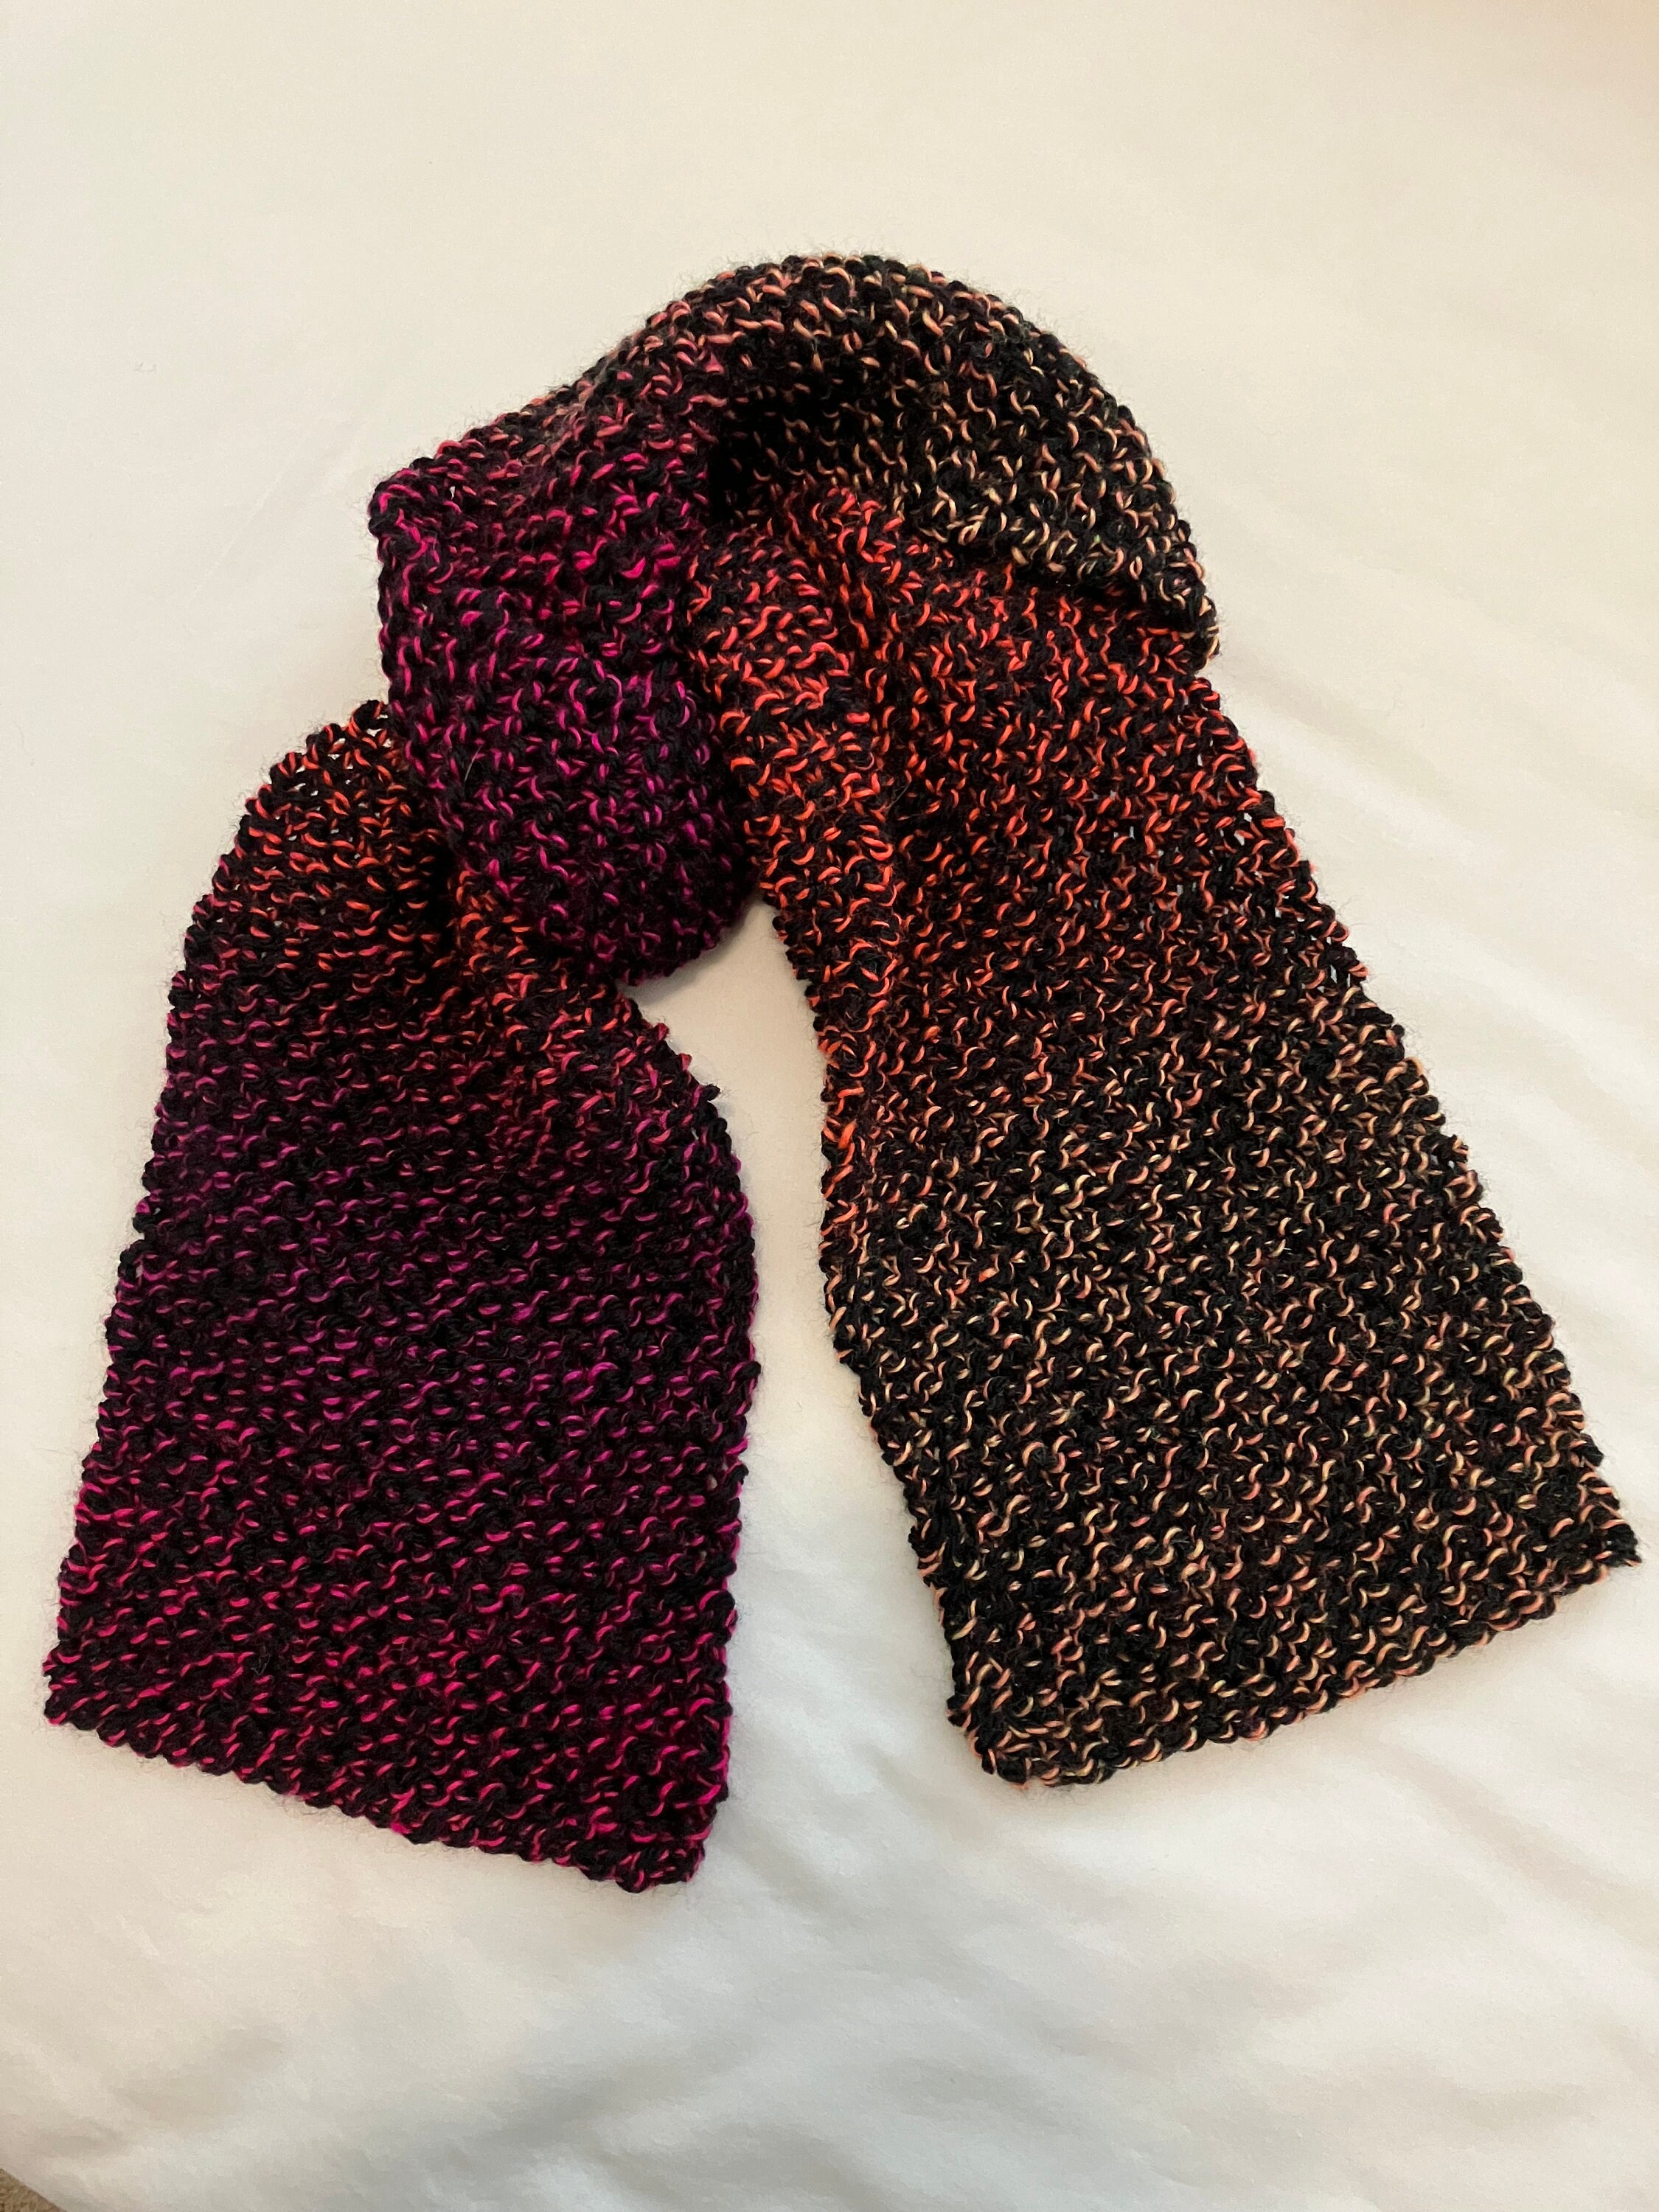 Handknit Scarf - Solid color with multi colored fringe - South Union Mills